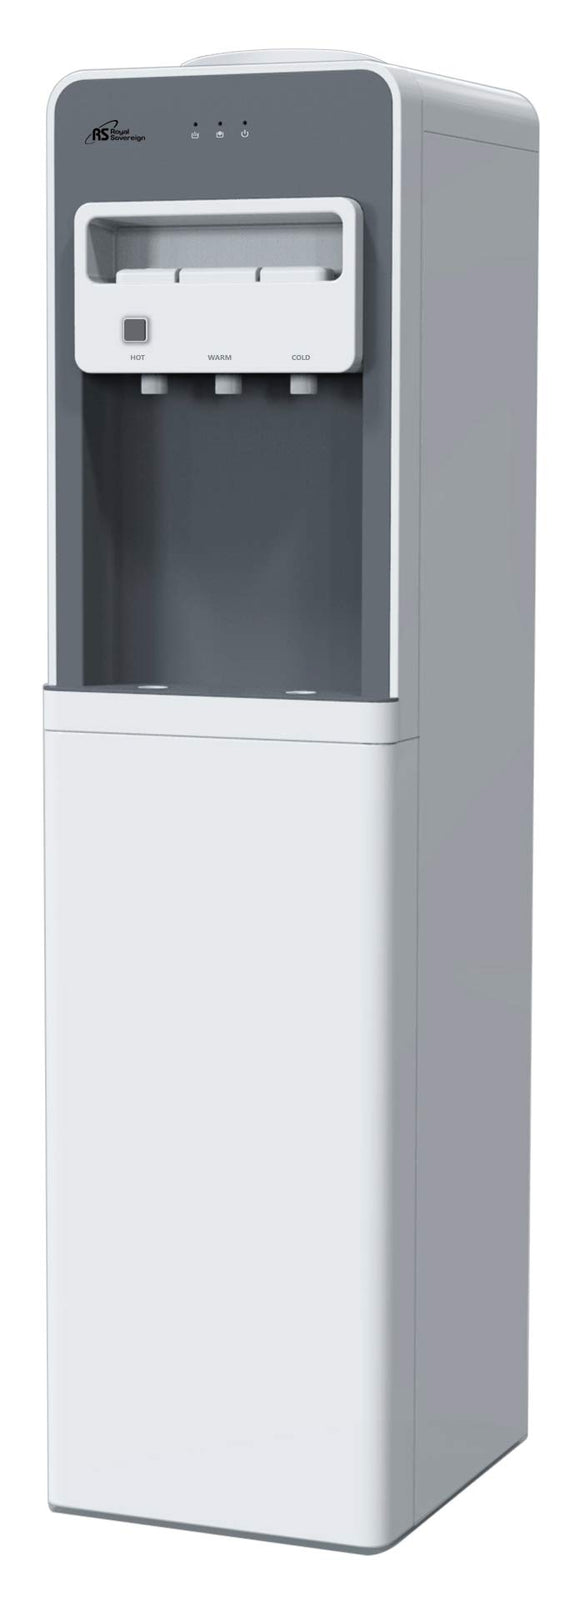 Royal Sovereign RWD-800W Free-standing Water Dispenser Appl Hot Cold Or Room Temperature Water